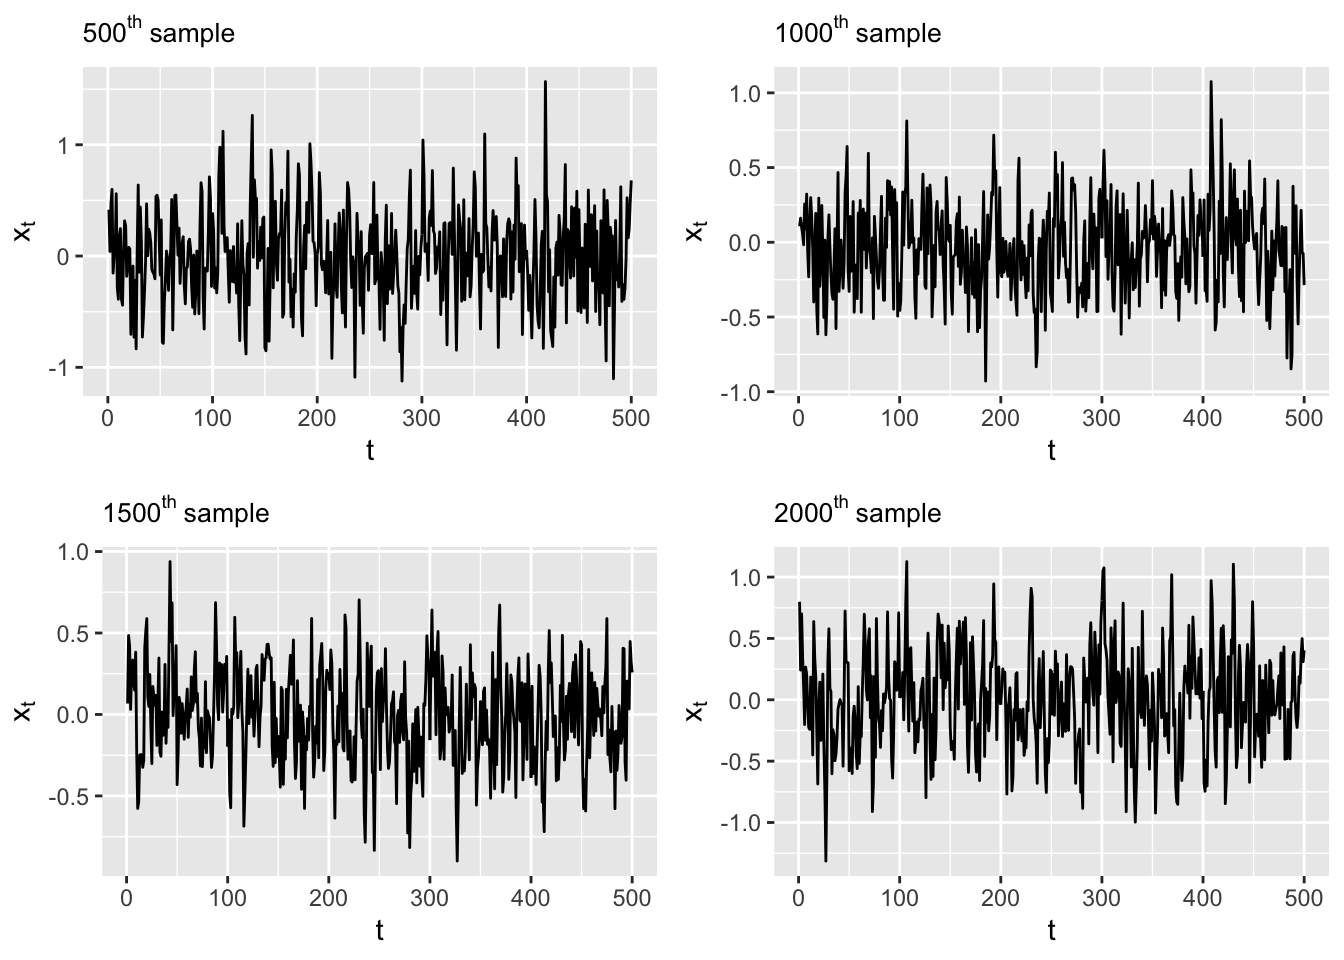 Time series plots of selected posterior samples from the AR(1) with level plus noise model.